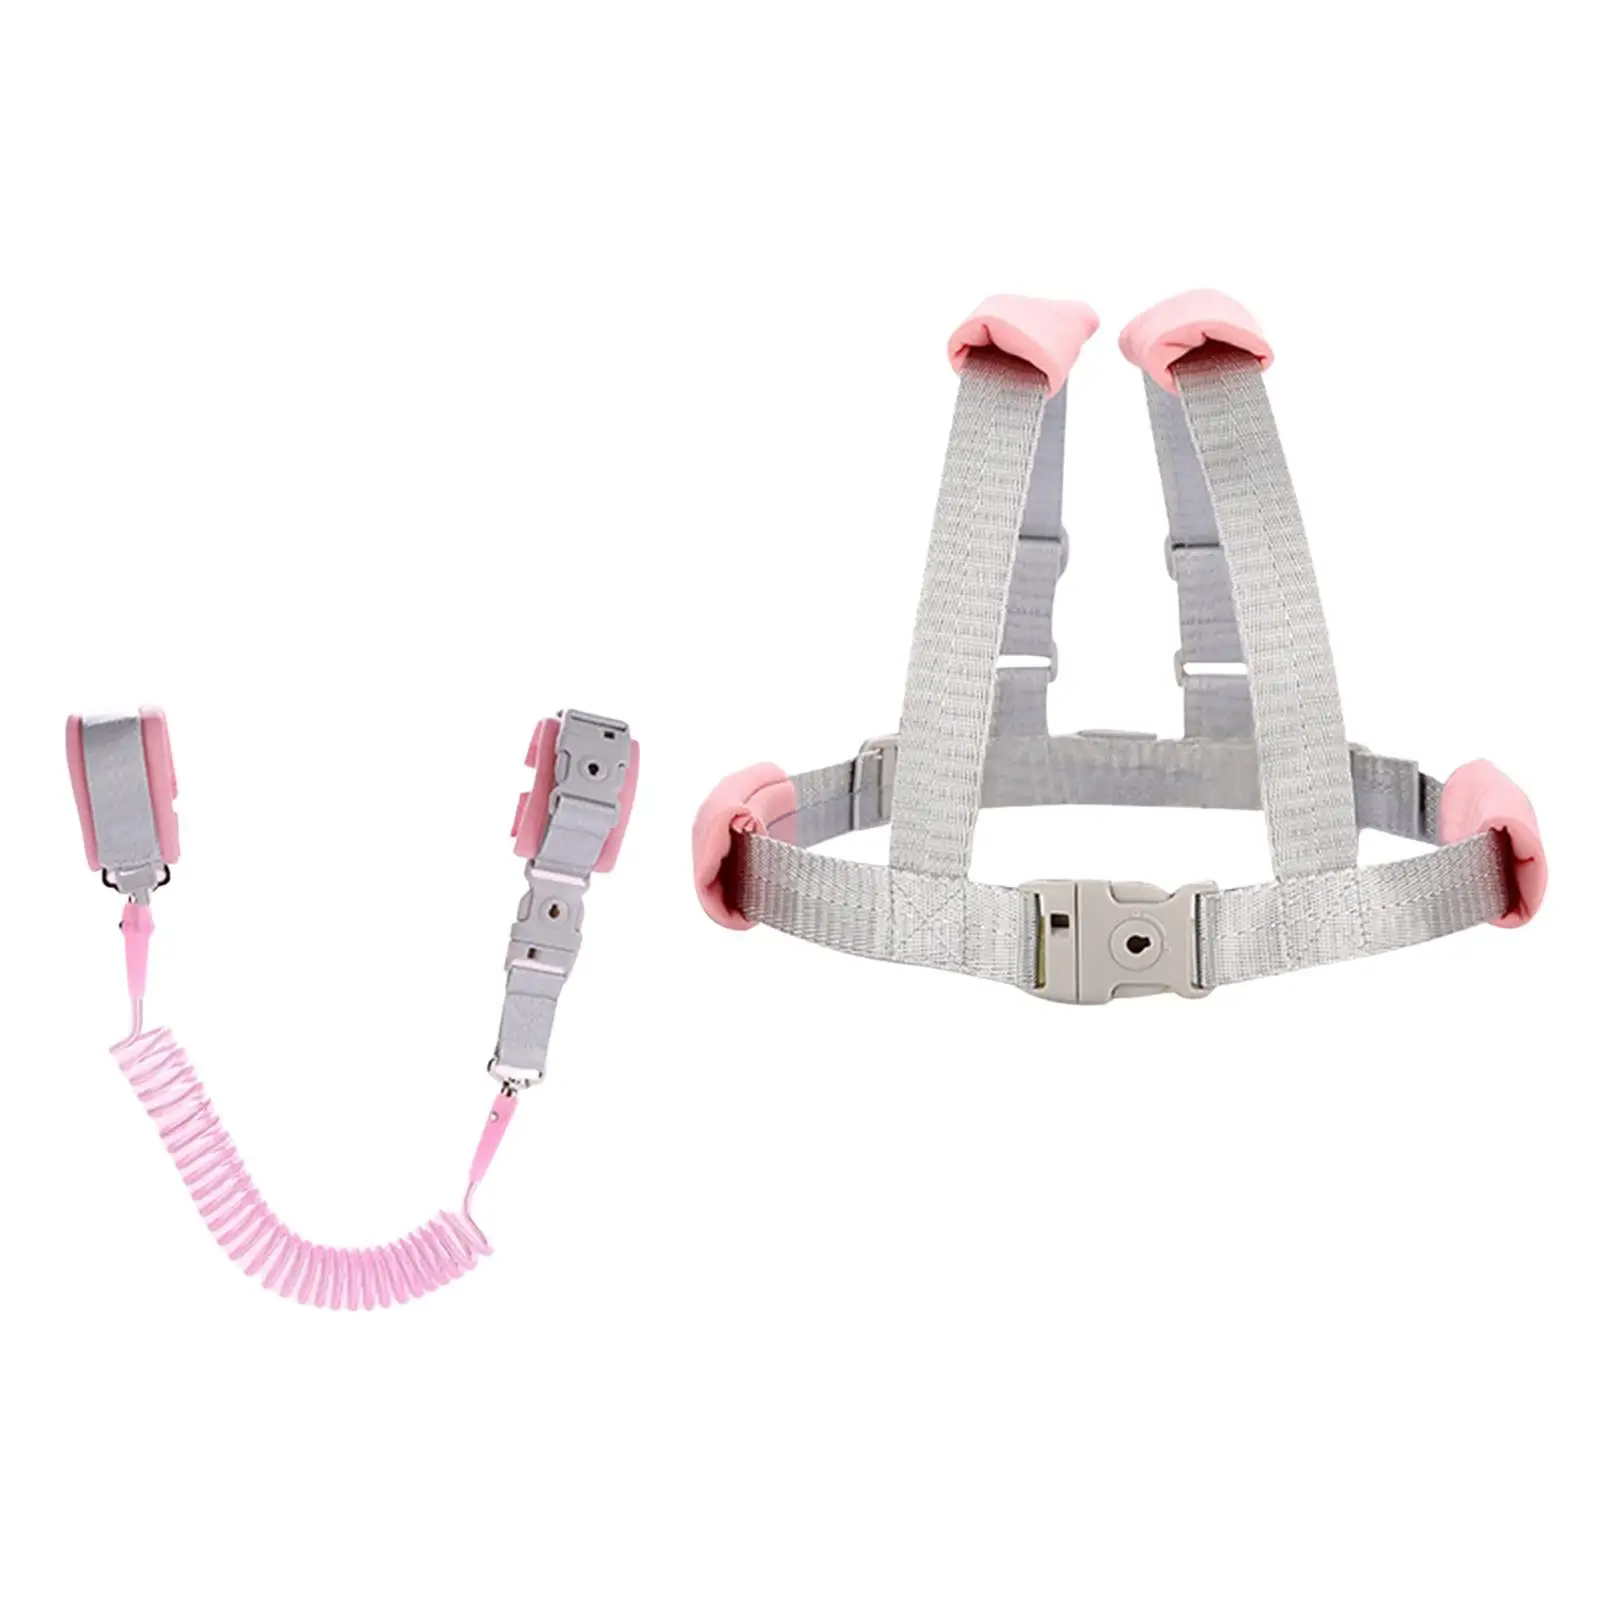 Anti Lost Wrist Link Flexible Wrist Safety Harnesses Kids Harness Children Leash for Girls Boys Baby Toddlers Outdoor